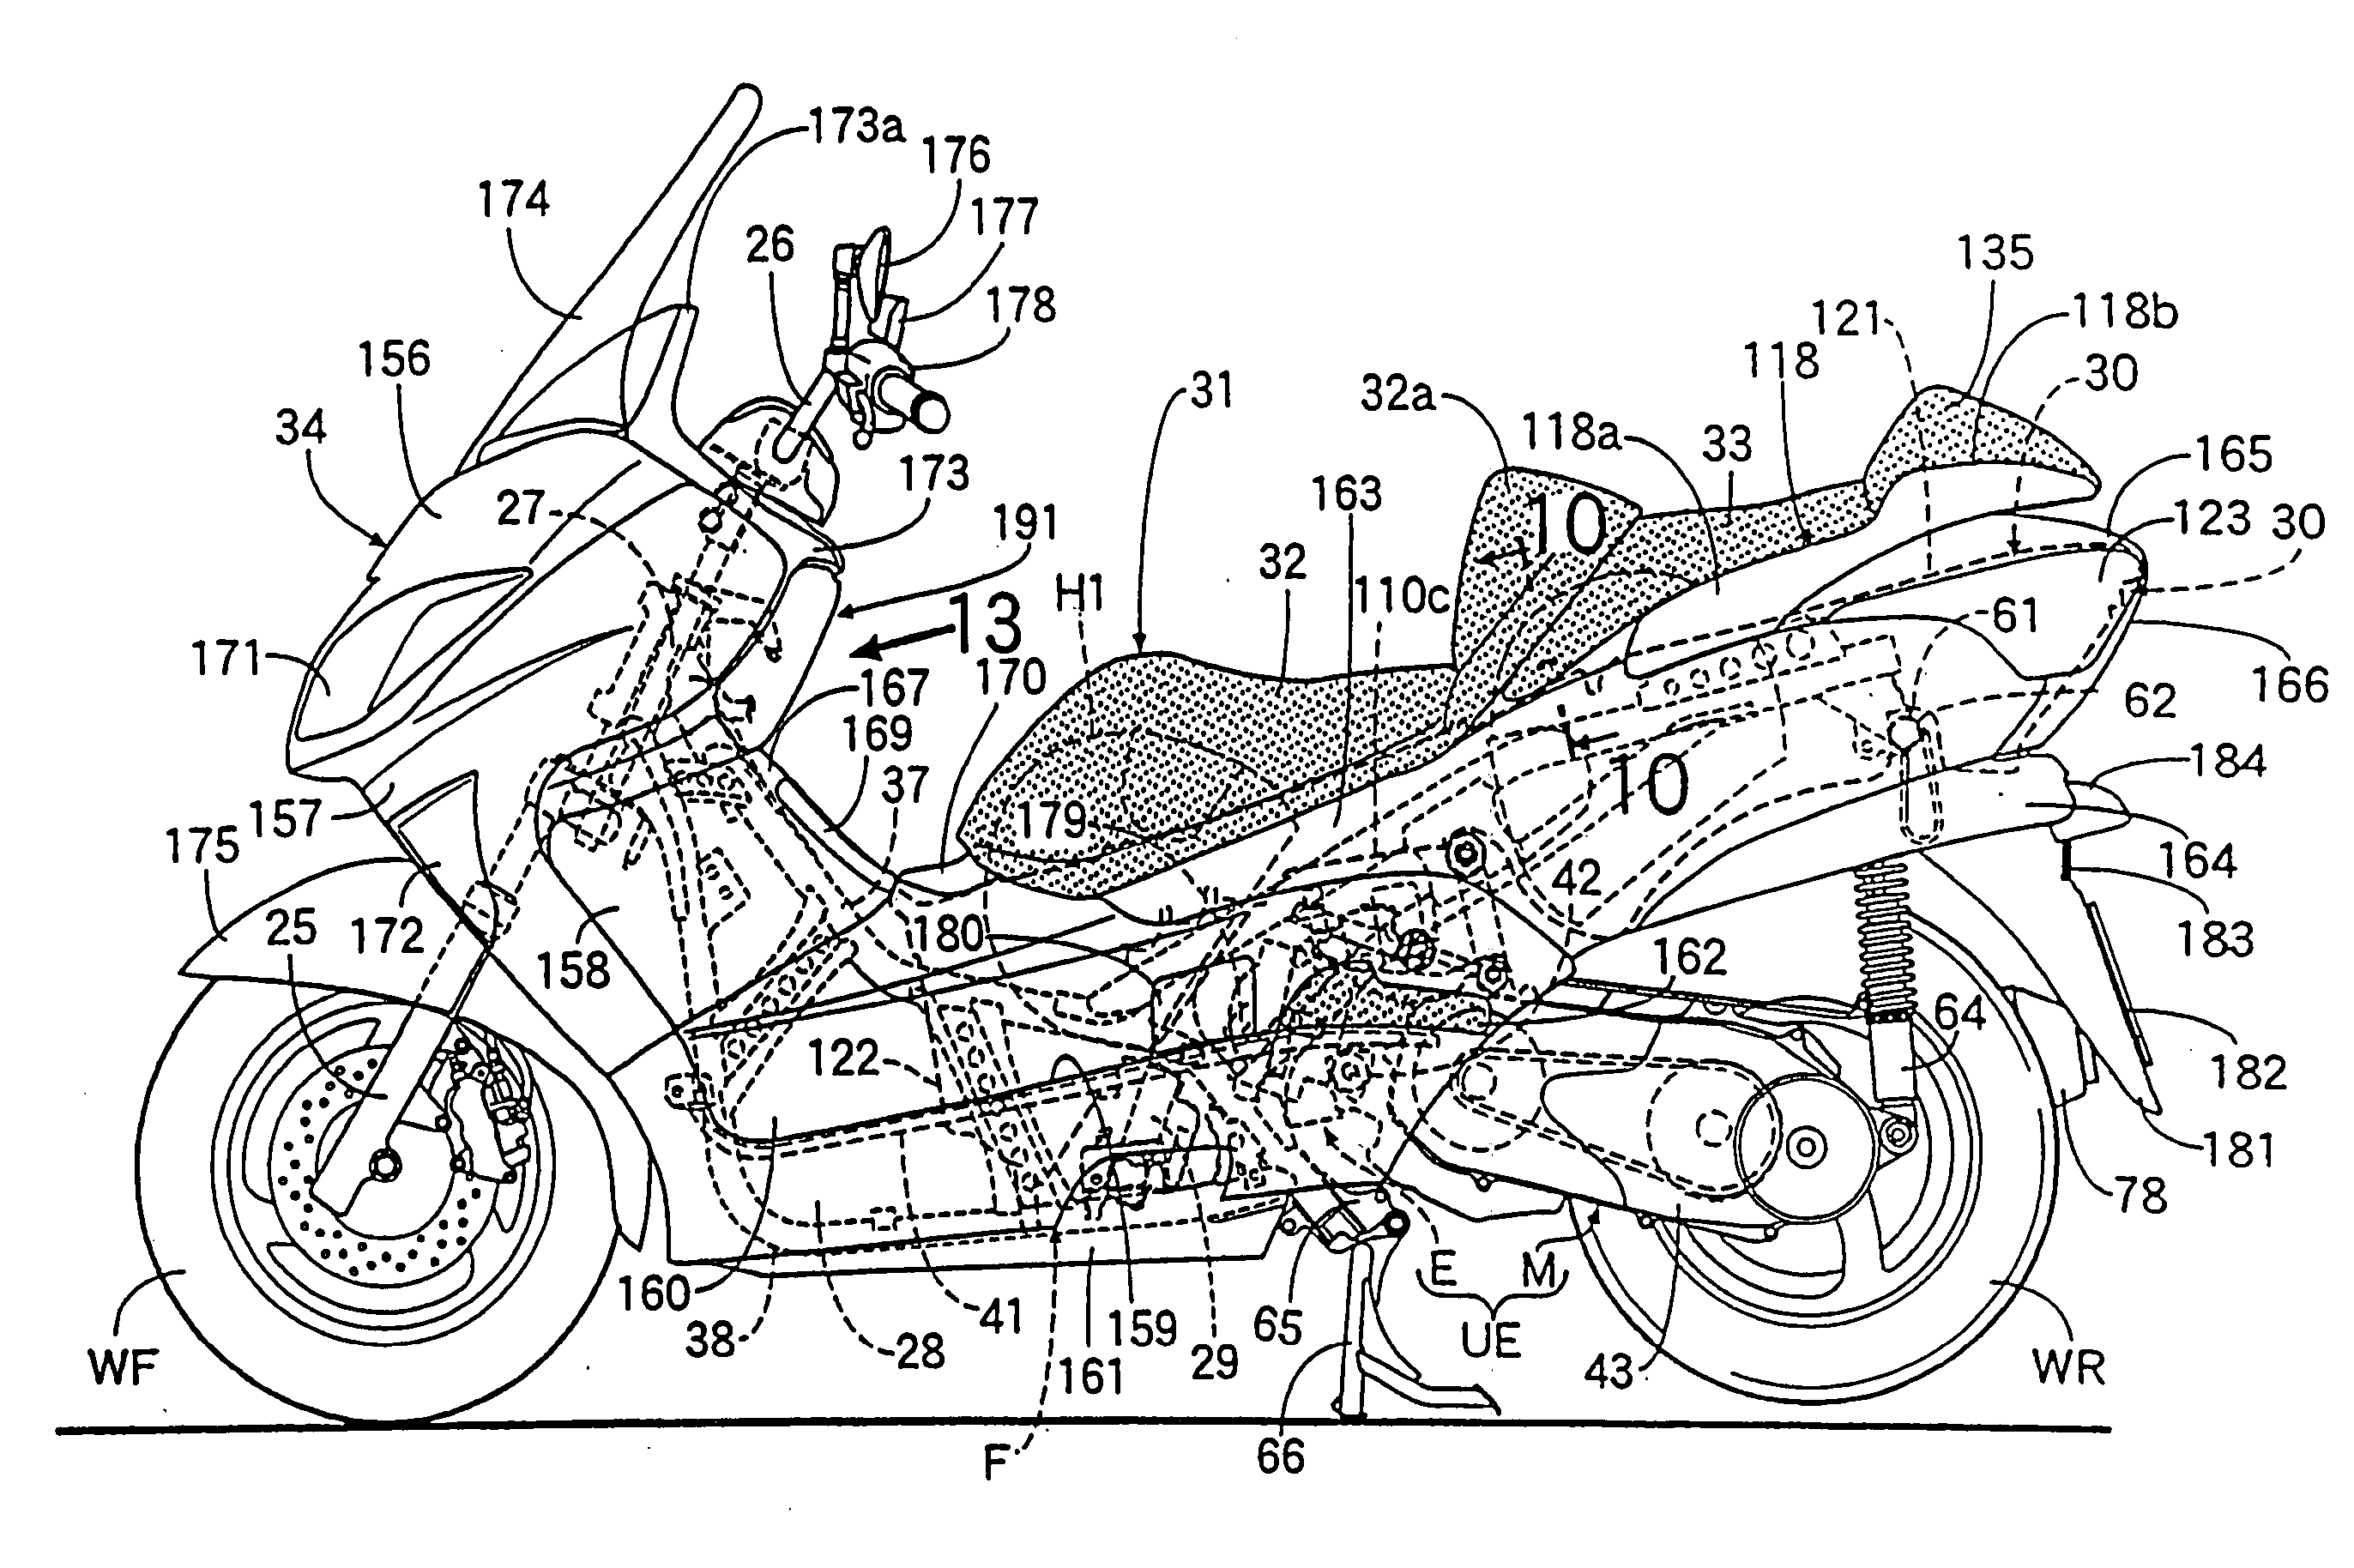 Luggage storage device for a motorcycle